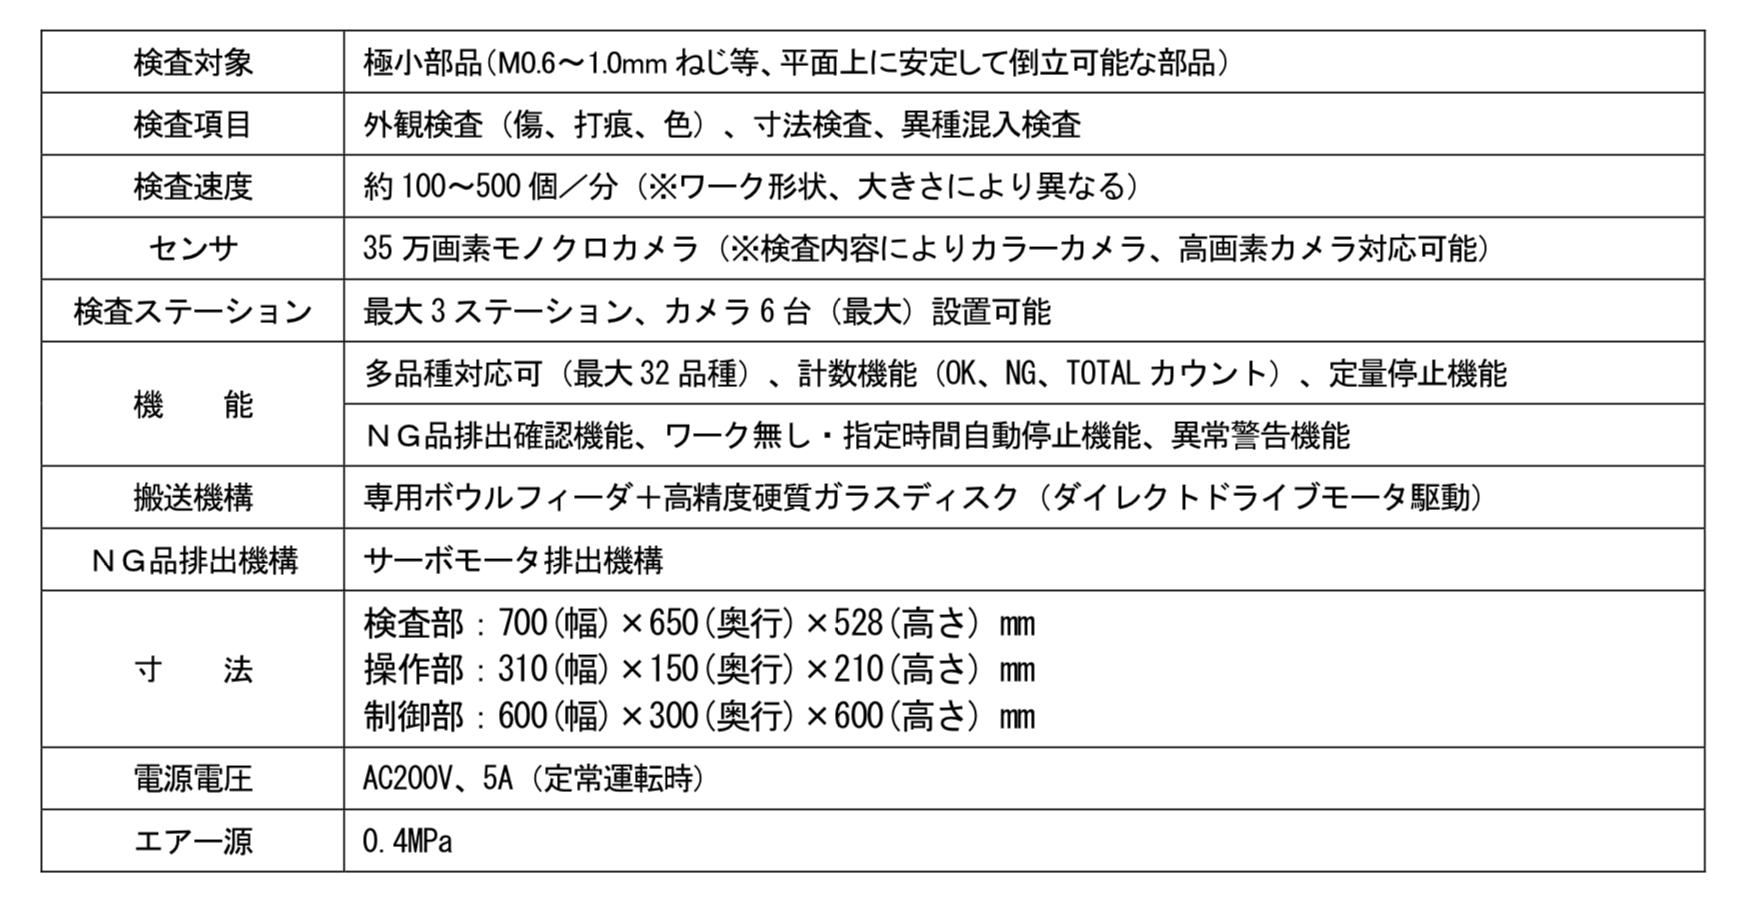 specification of the product 2019-05-15 8.39.25.png